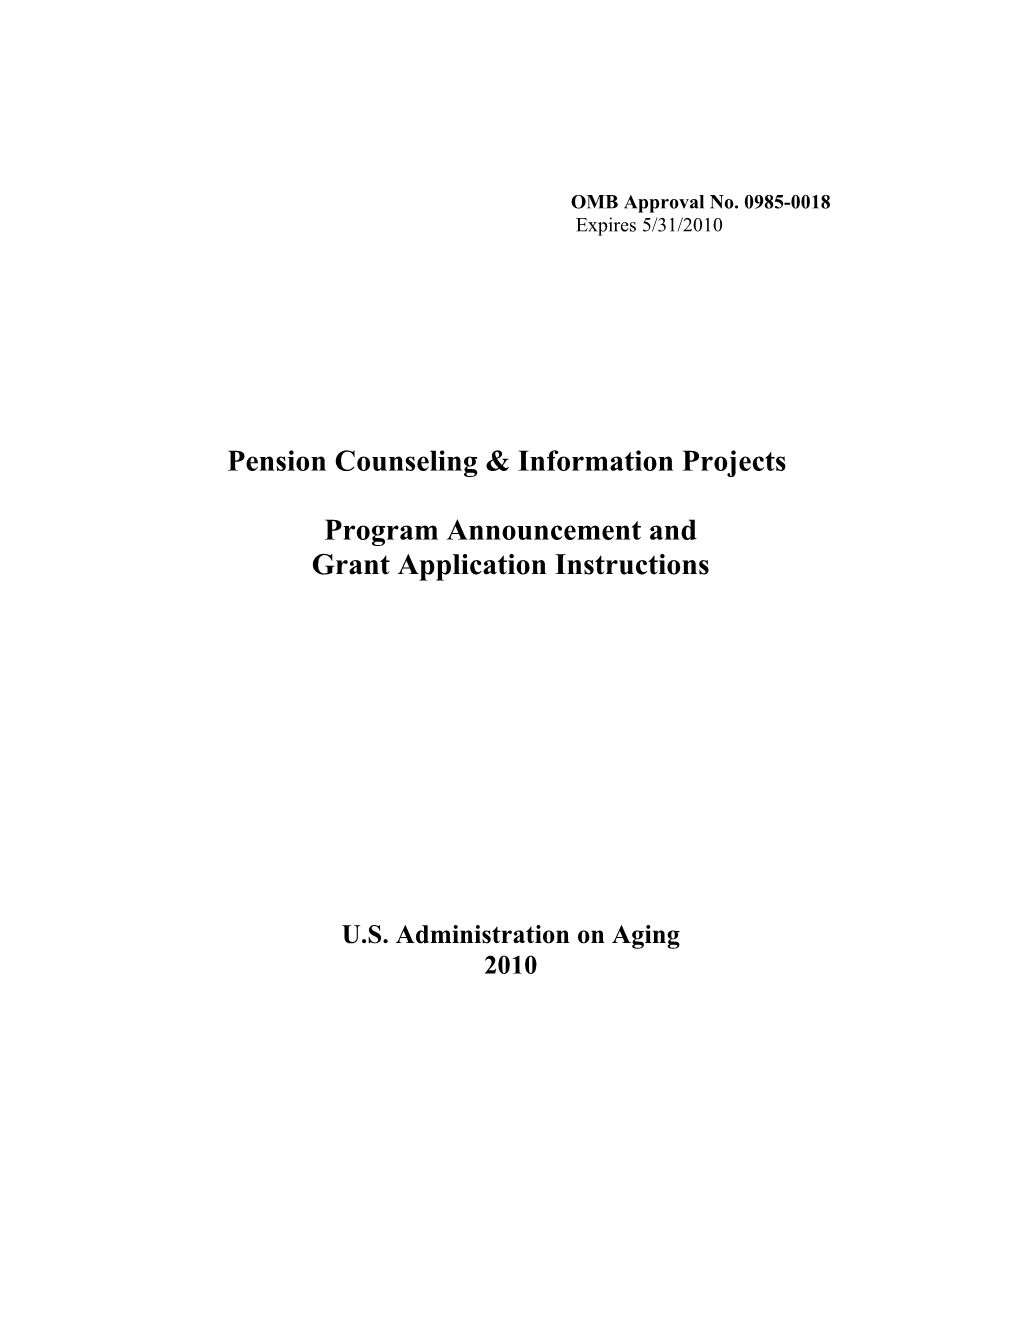 Pension Counseling and Information Projects